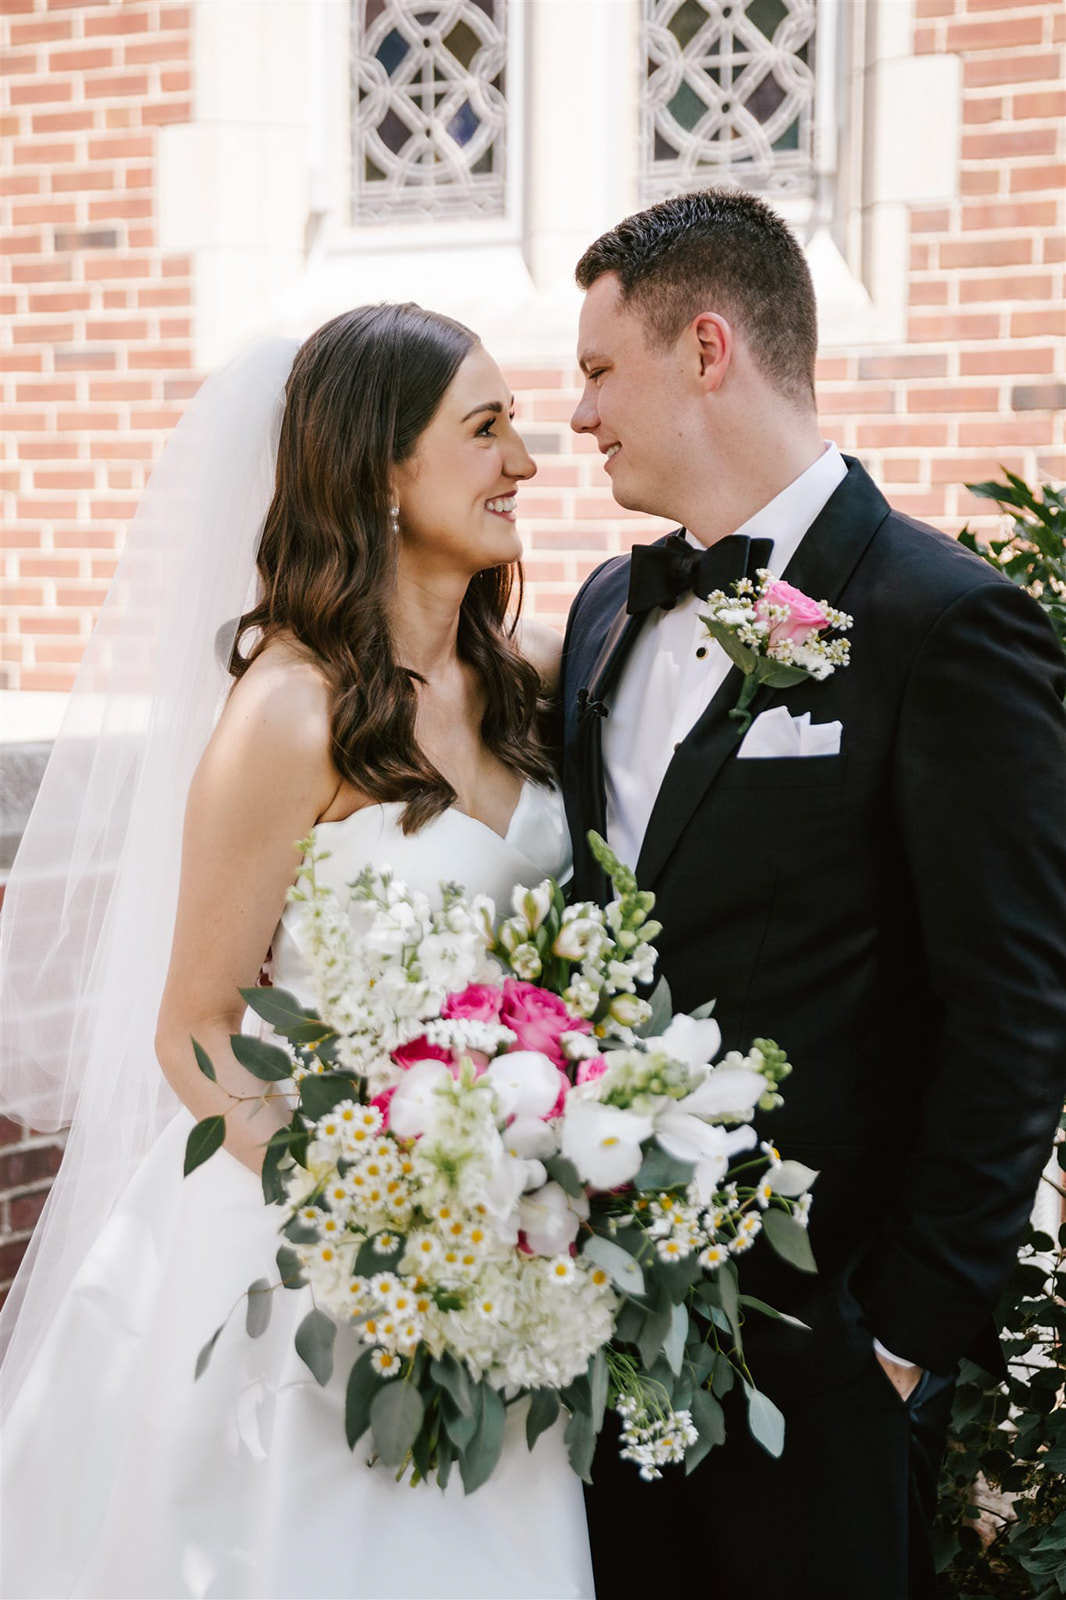 The bride and groom stand in the courtyard, with a bouquet of pink, white, and yellow flowers, creating a vibrant scene.